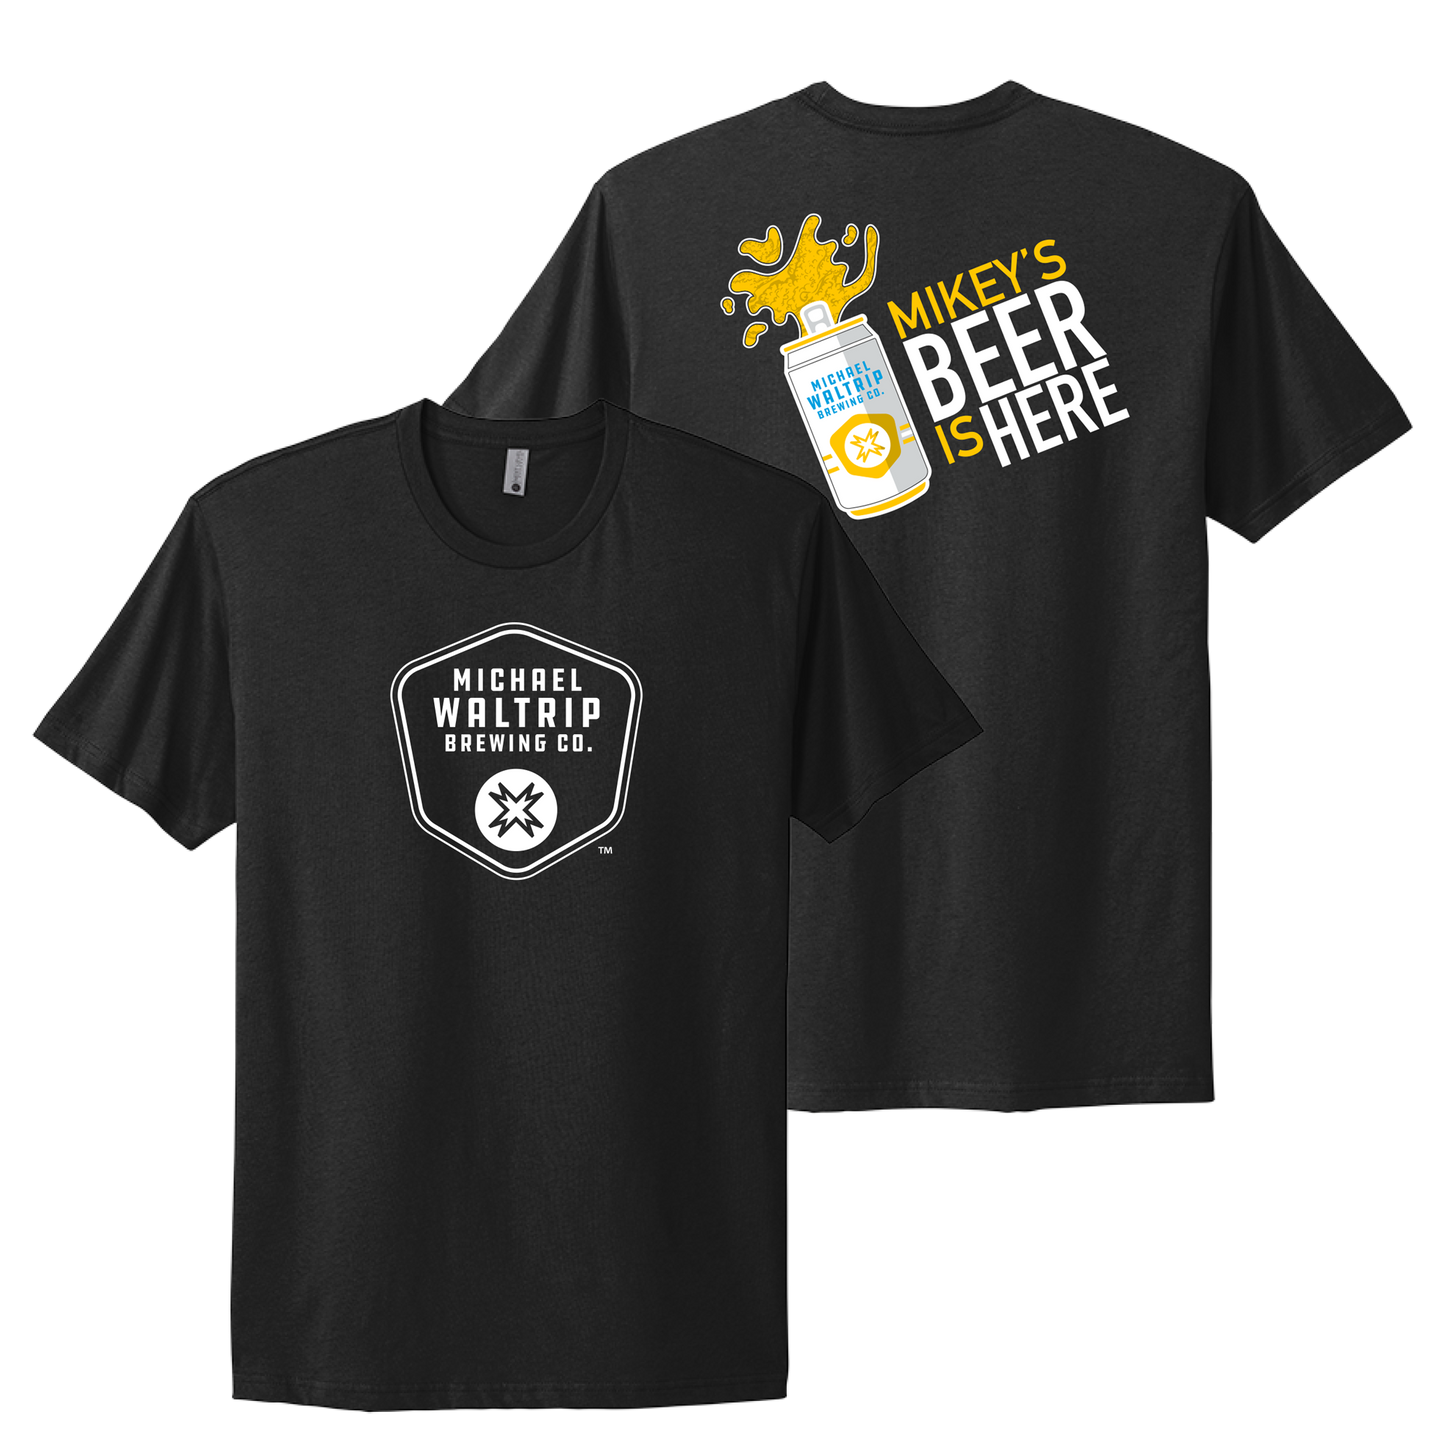 Mikey's Beer Tee